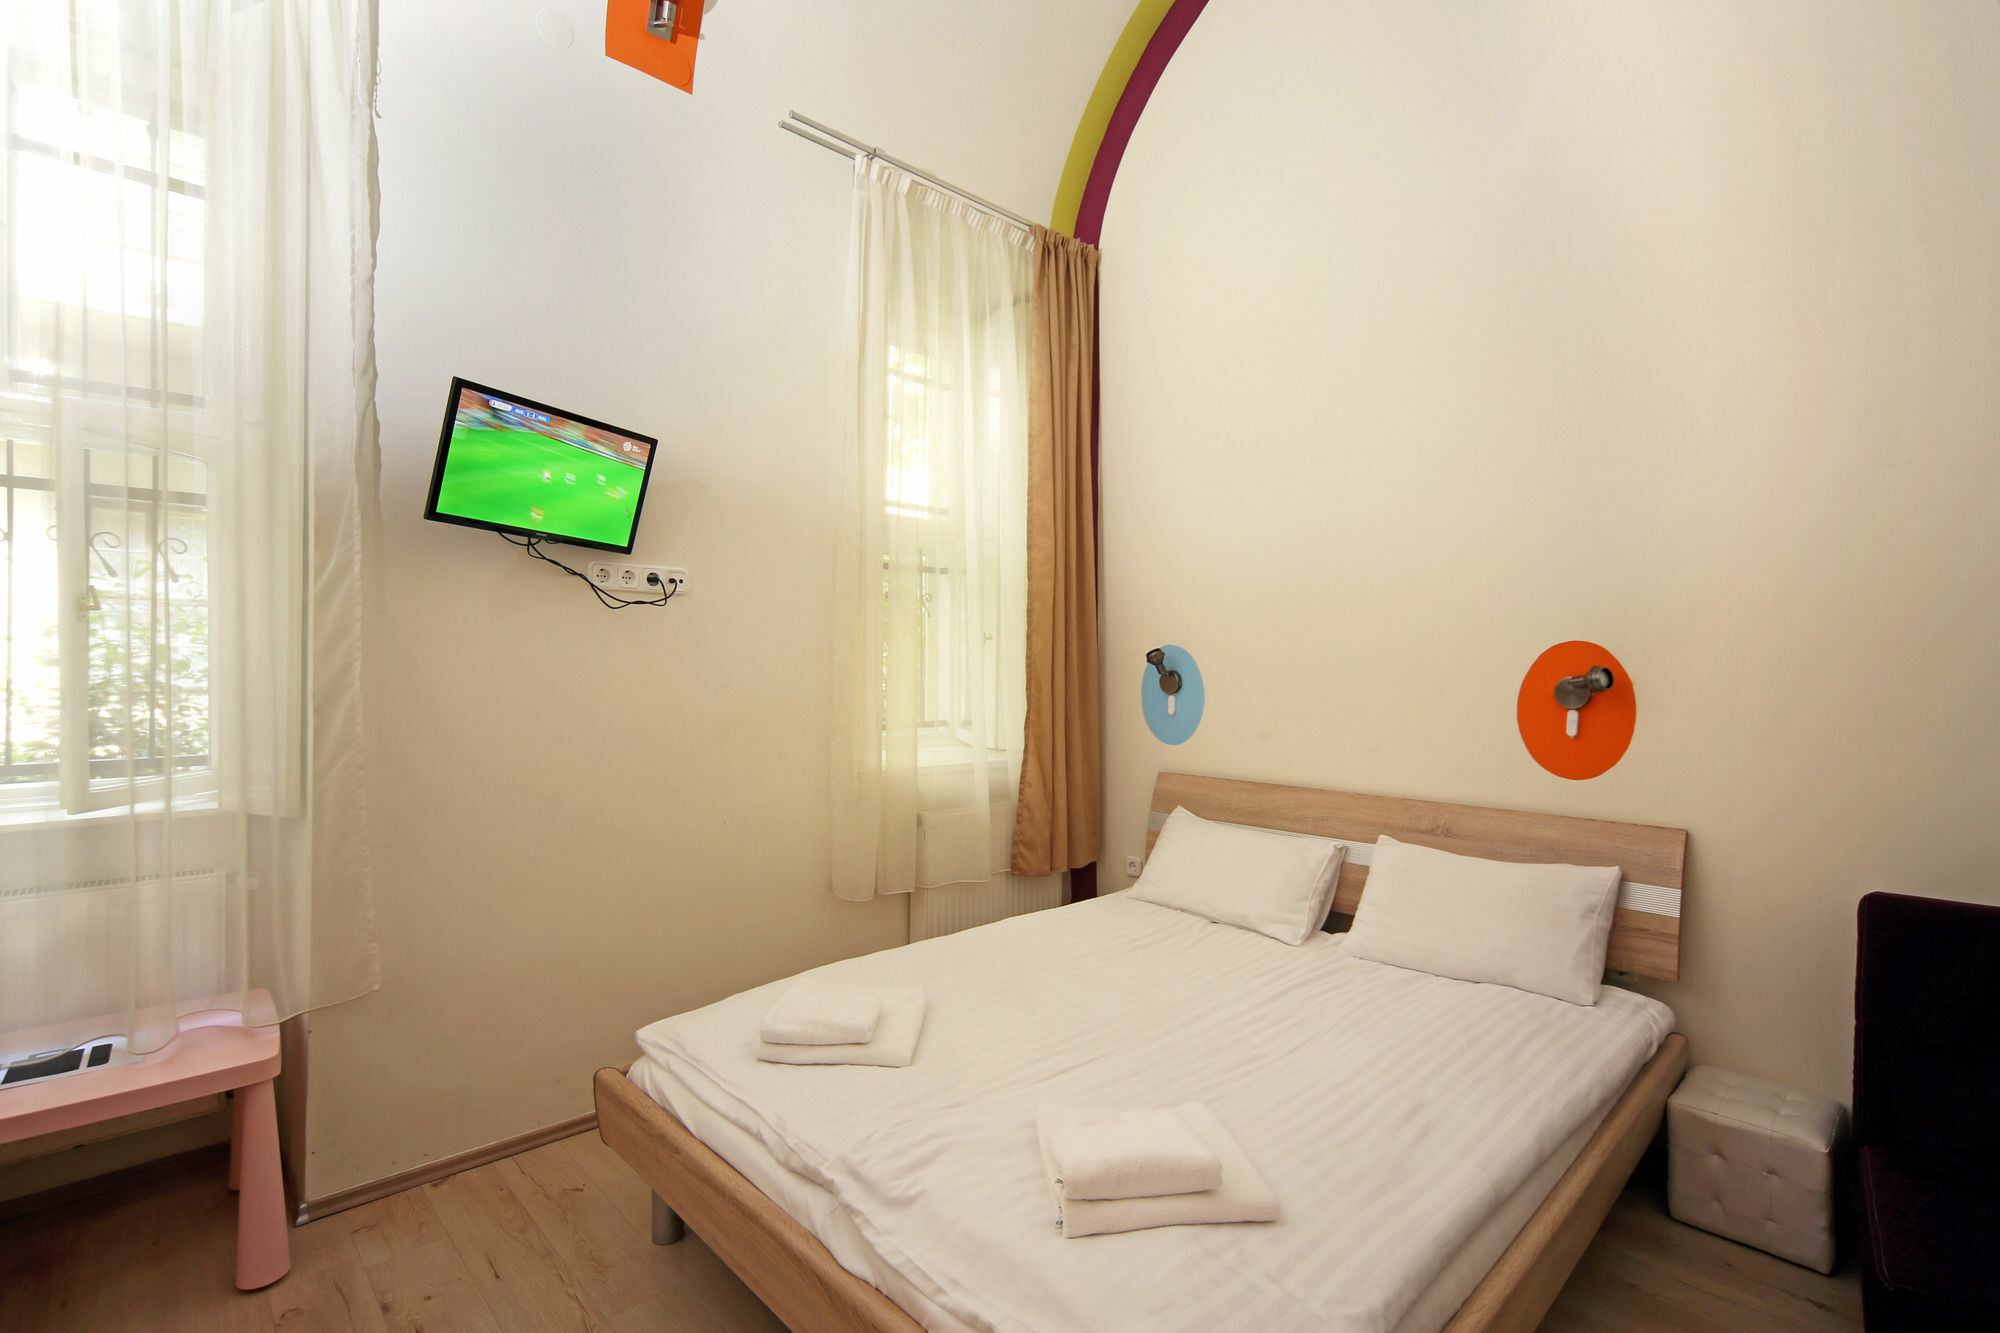 HOTEL AMBER TERRACE STUDIOS BUDAPEST 3* (Hungary) - from US$ 48 | BOOKED